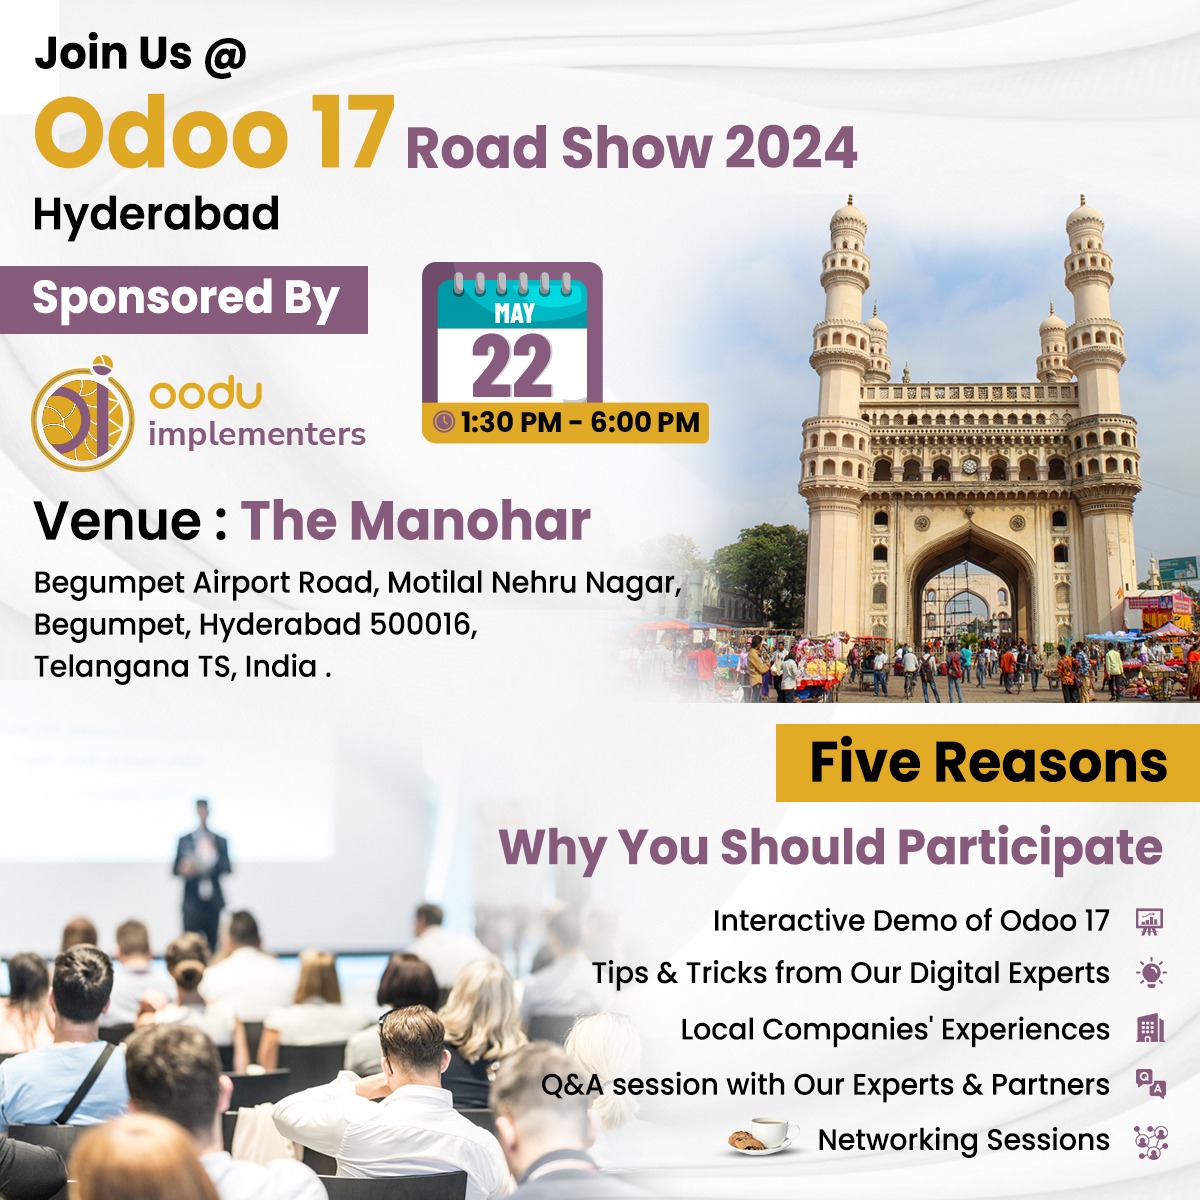 Oodu Implementers is thrilled to invite you to the Odoo 17 Roadshow - Hyderabad 2024. 

Hurry Up & Register Now!  

#OI #OoduImplementers  #OdooImplementersinCoimbatore #OdooImplementersinChennai #OdooImplementersinPune #Roadshow  #RoadShowHyderabad2024 #EventSponsors #JoinUs